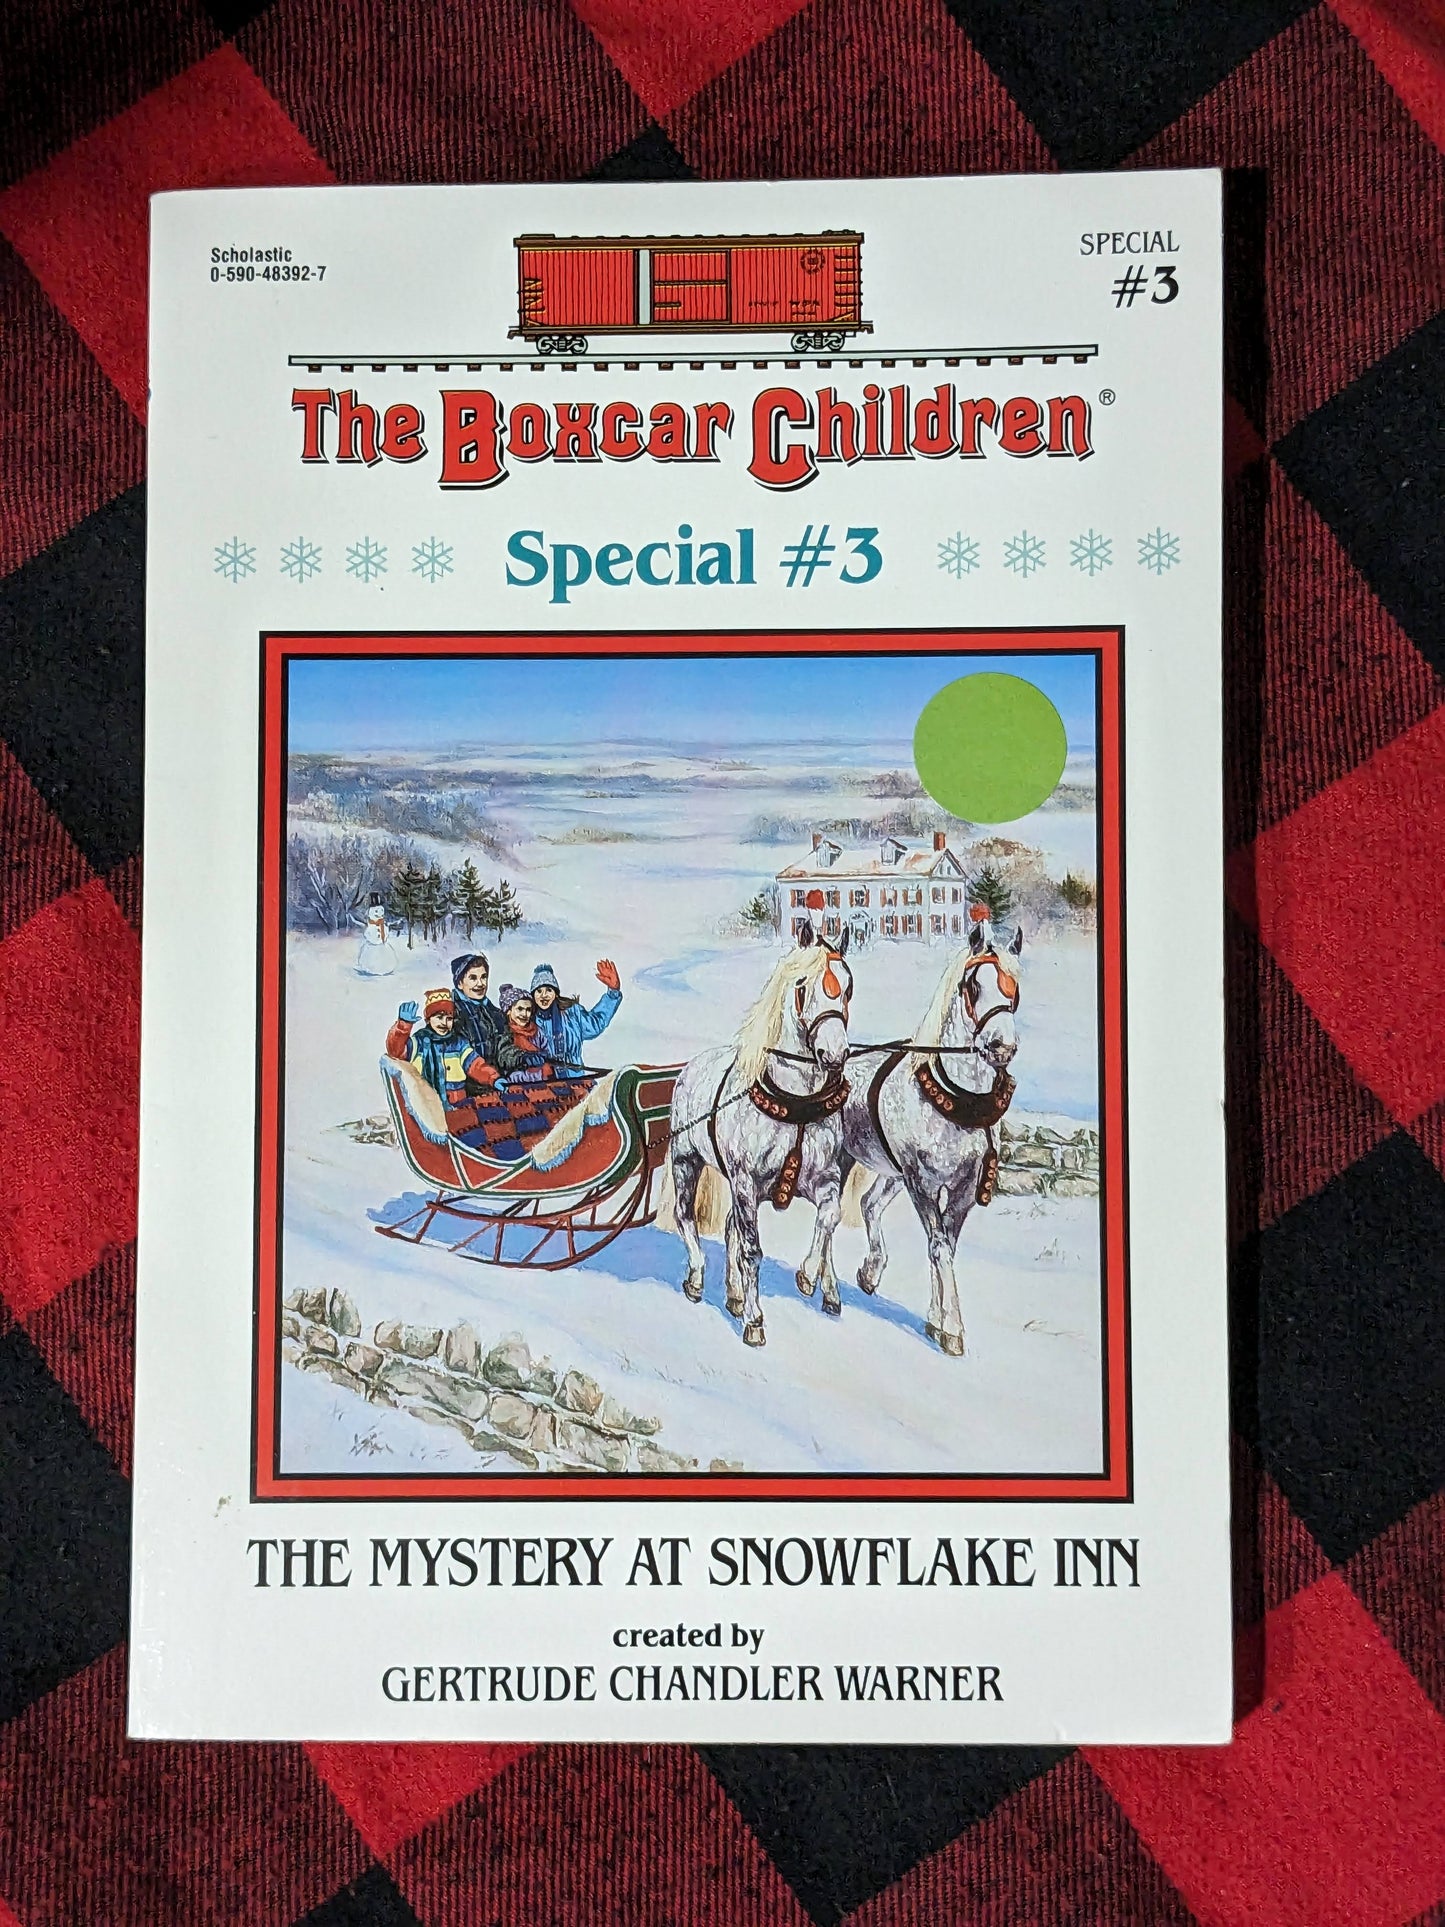 Mystery at Snowflake Inn, The (Boxcar Children #3) by Gertrude Chandler Warner - Vintage Paperback